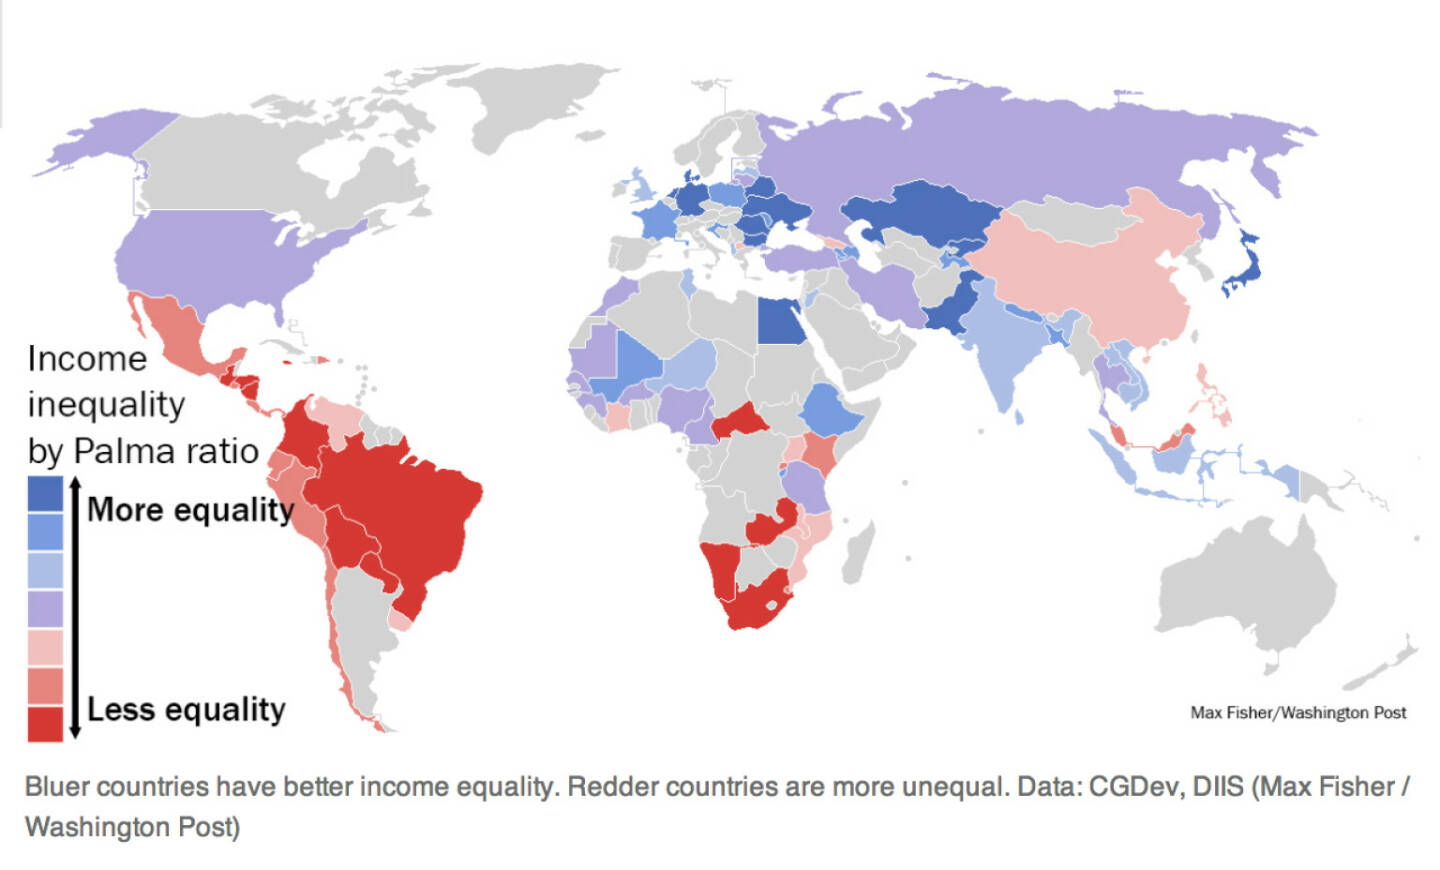 How countries compare on economic inequality